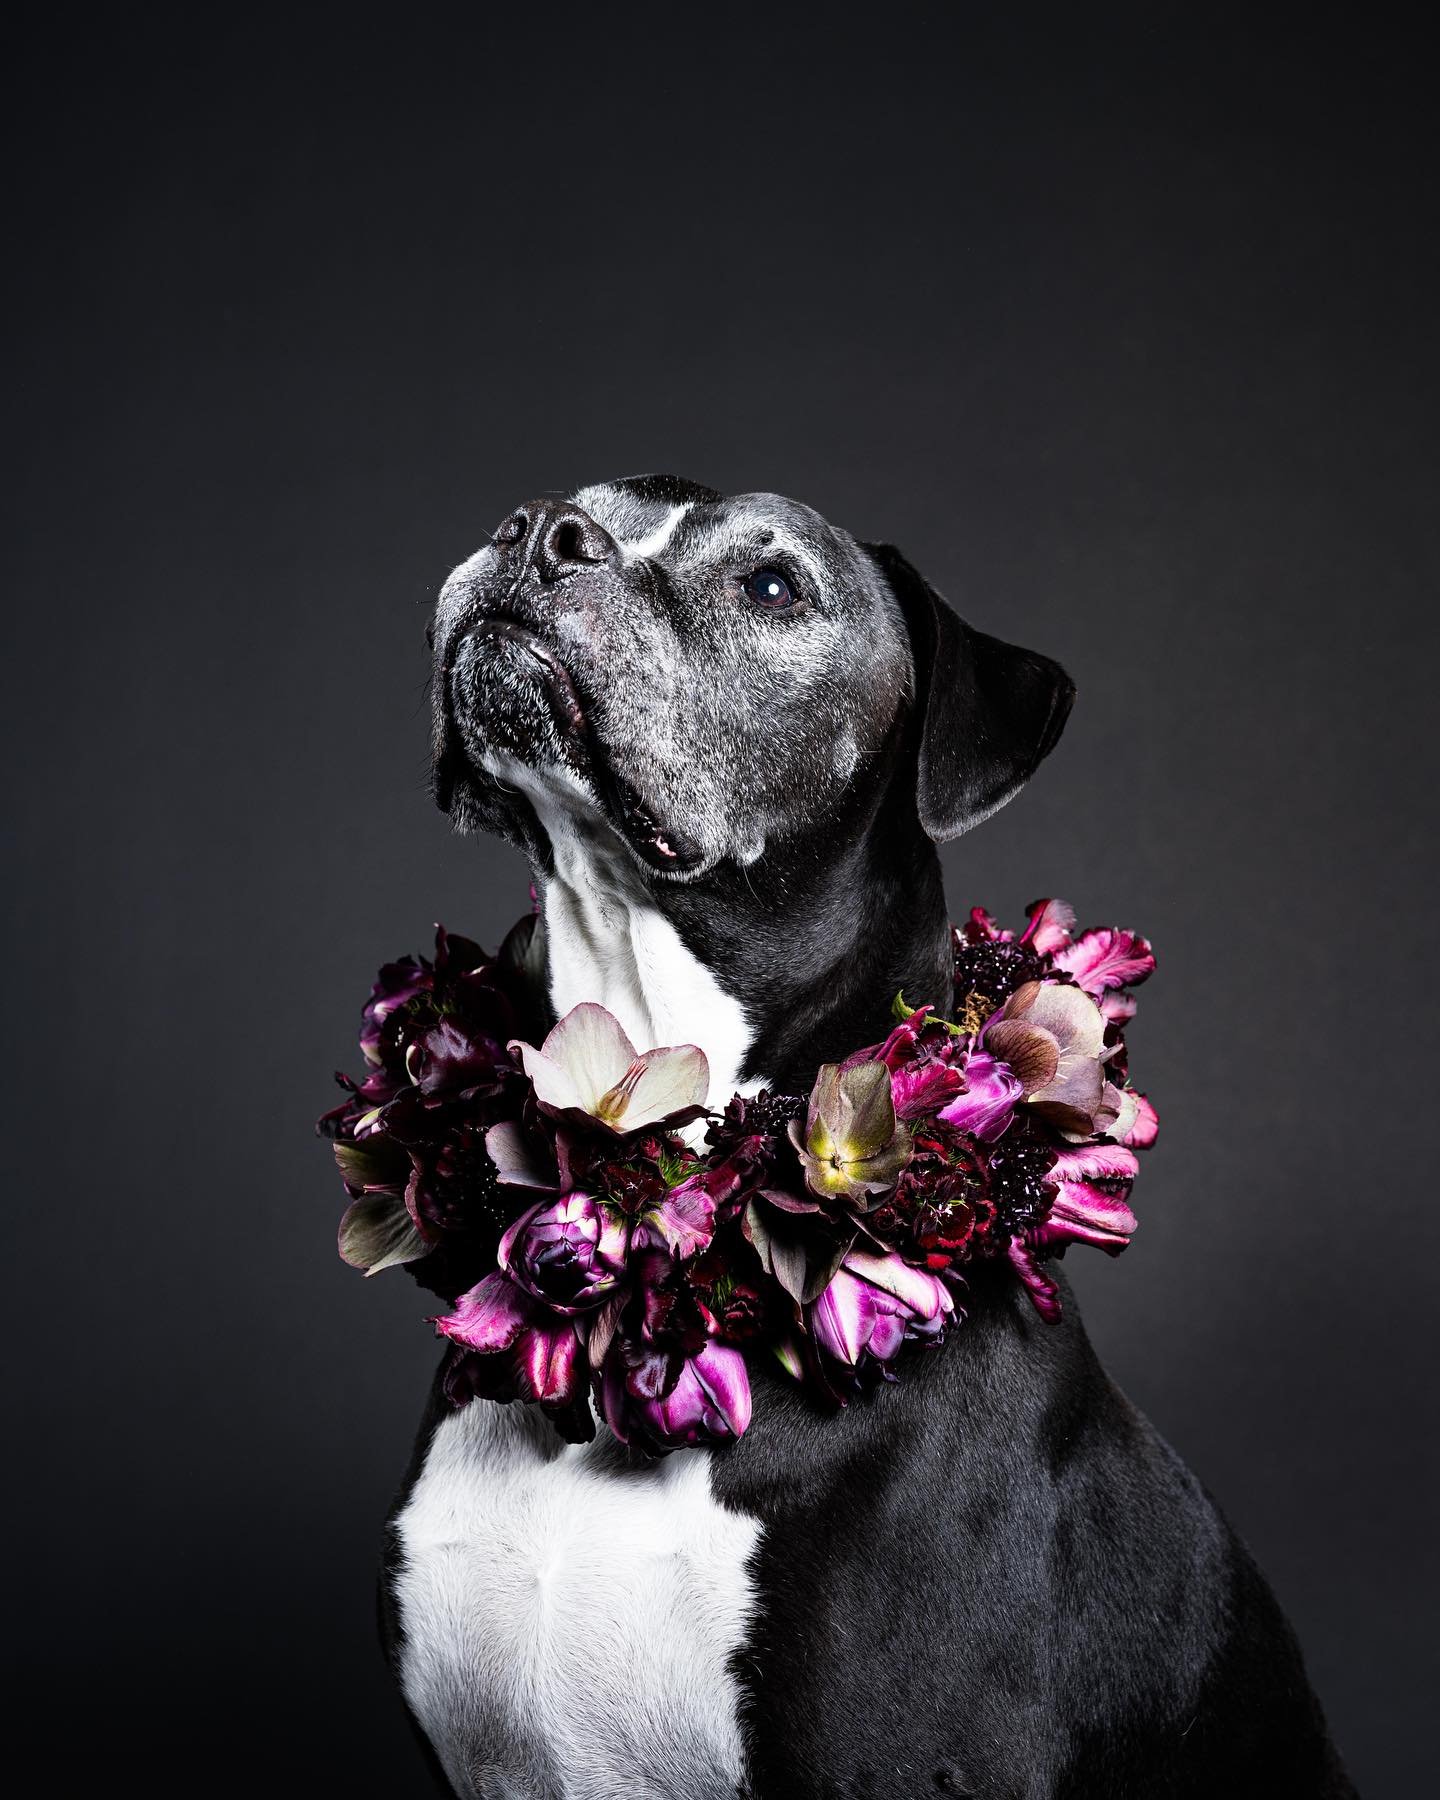 Rudy.

This collaboration was dreamed up by us and the incredibly talented Kyle of @hafnerflorist . It was a true pleasure to work with Kyle and his dear old boy, Rudy. 

What do you think? Does this image say &ldquo;spring&rdquo; to you?

#blacktuli